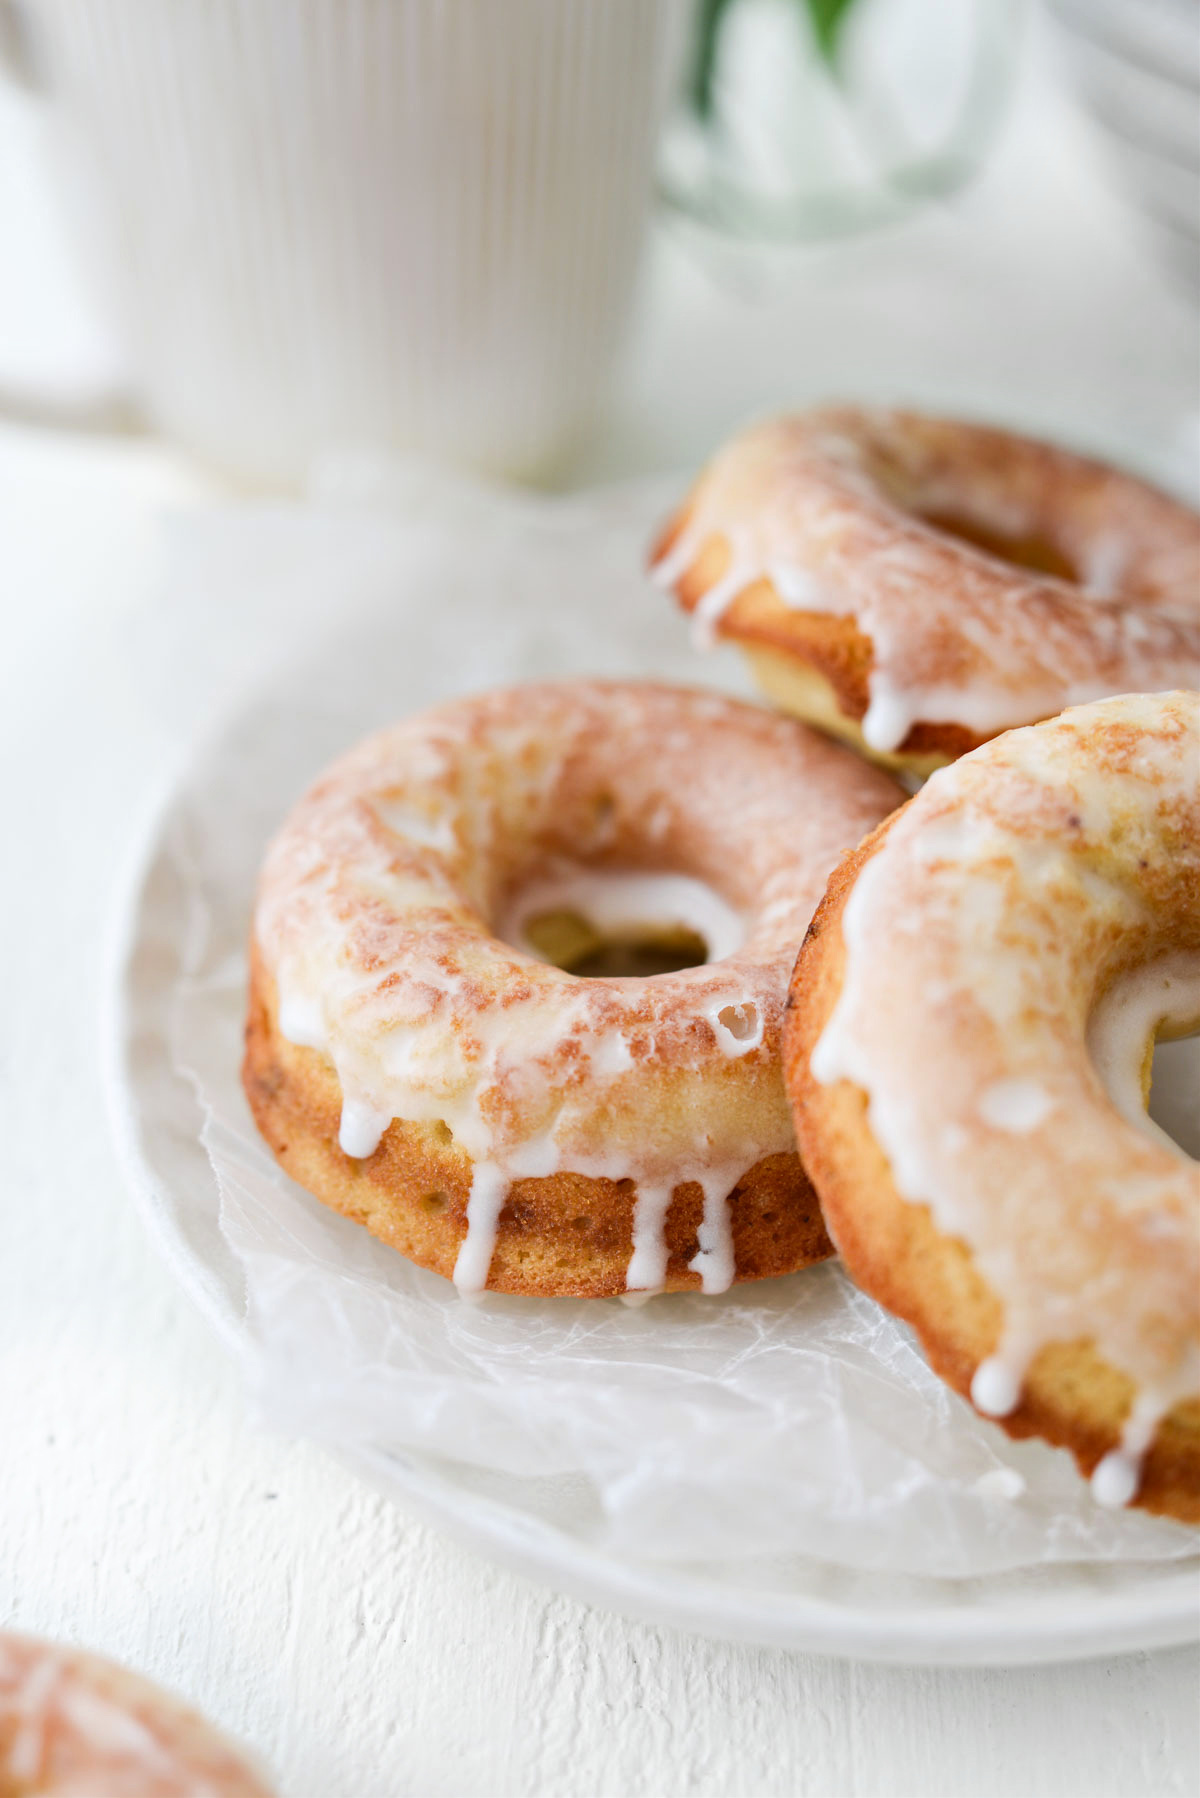 Baked Old Fashioned Glazed Donuts - Herbs & Flour